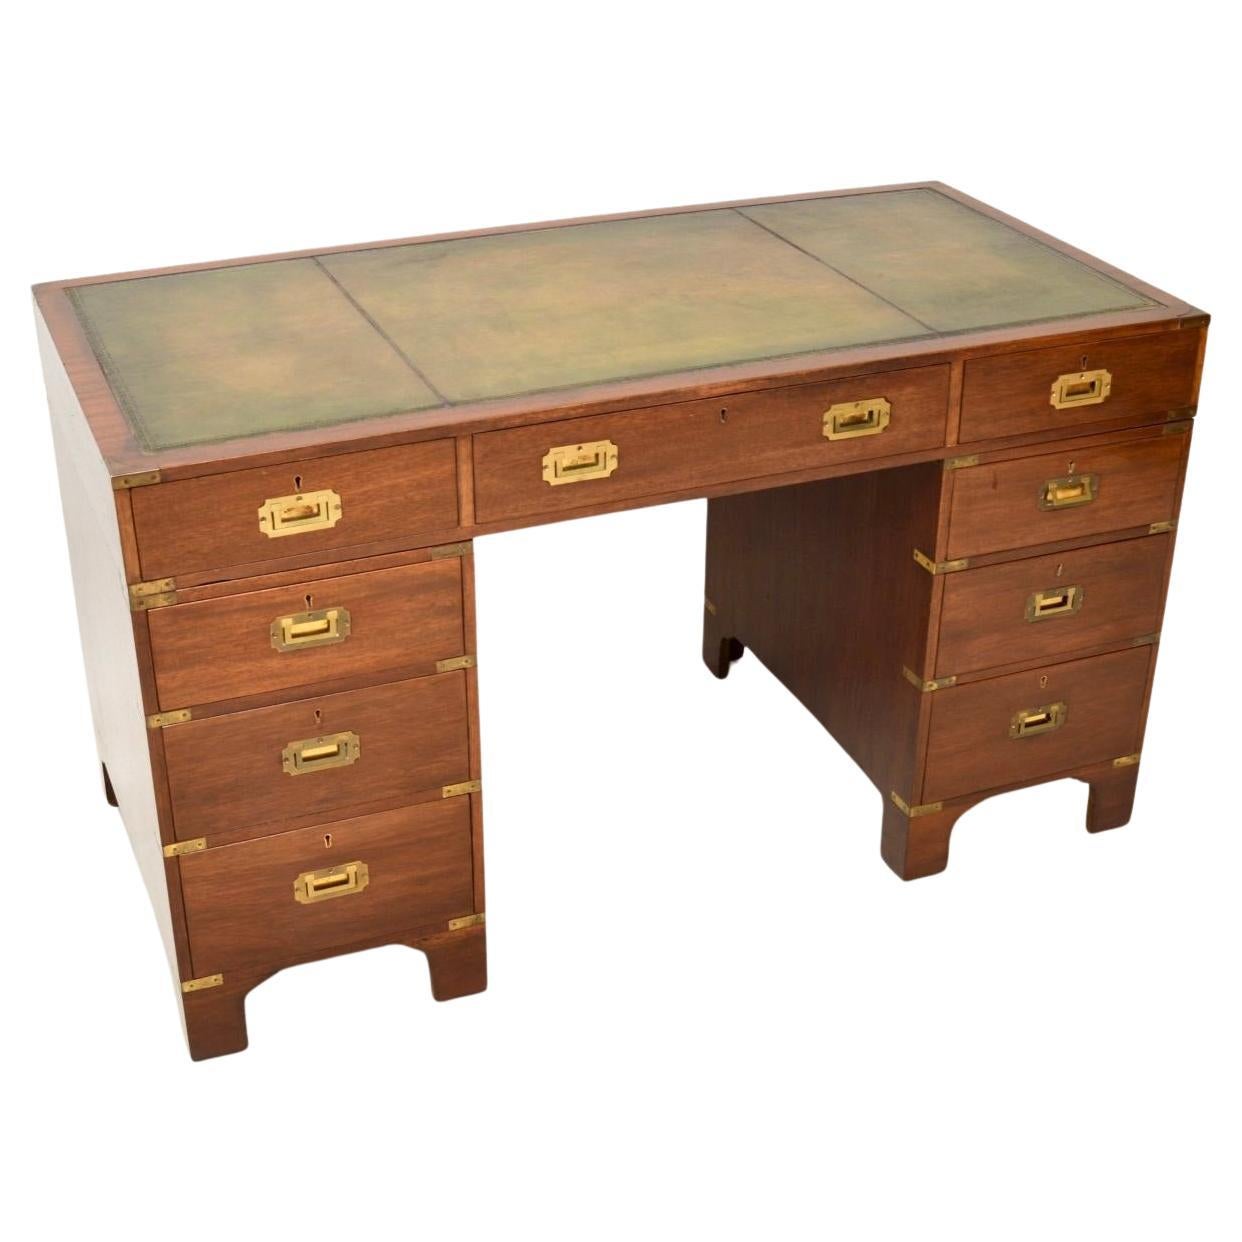 Antique Military Campaign Style Desk For Sale